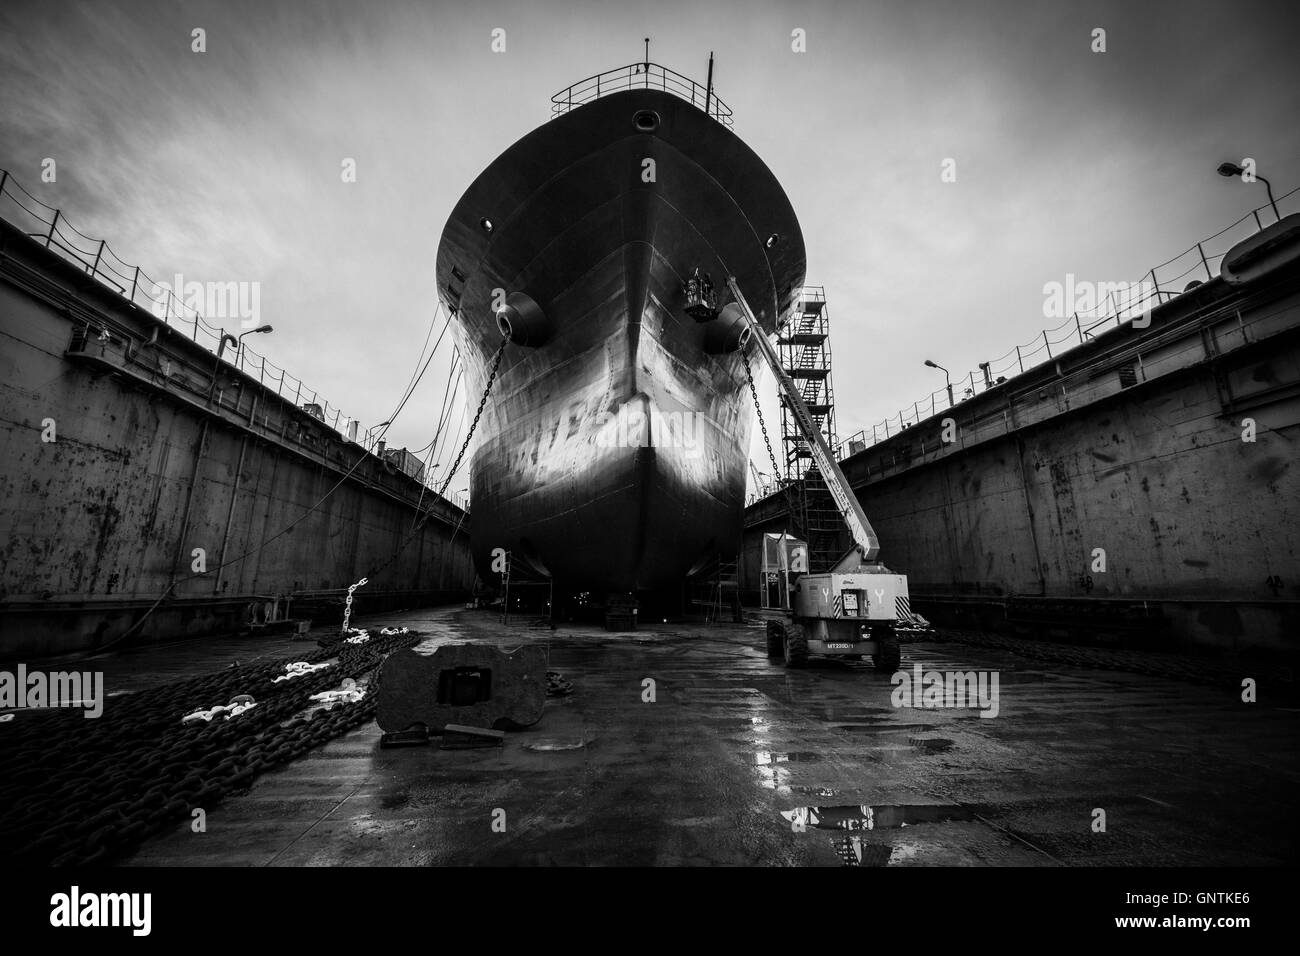 Inside a Floating Dry dock Stock Photo